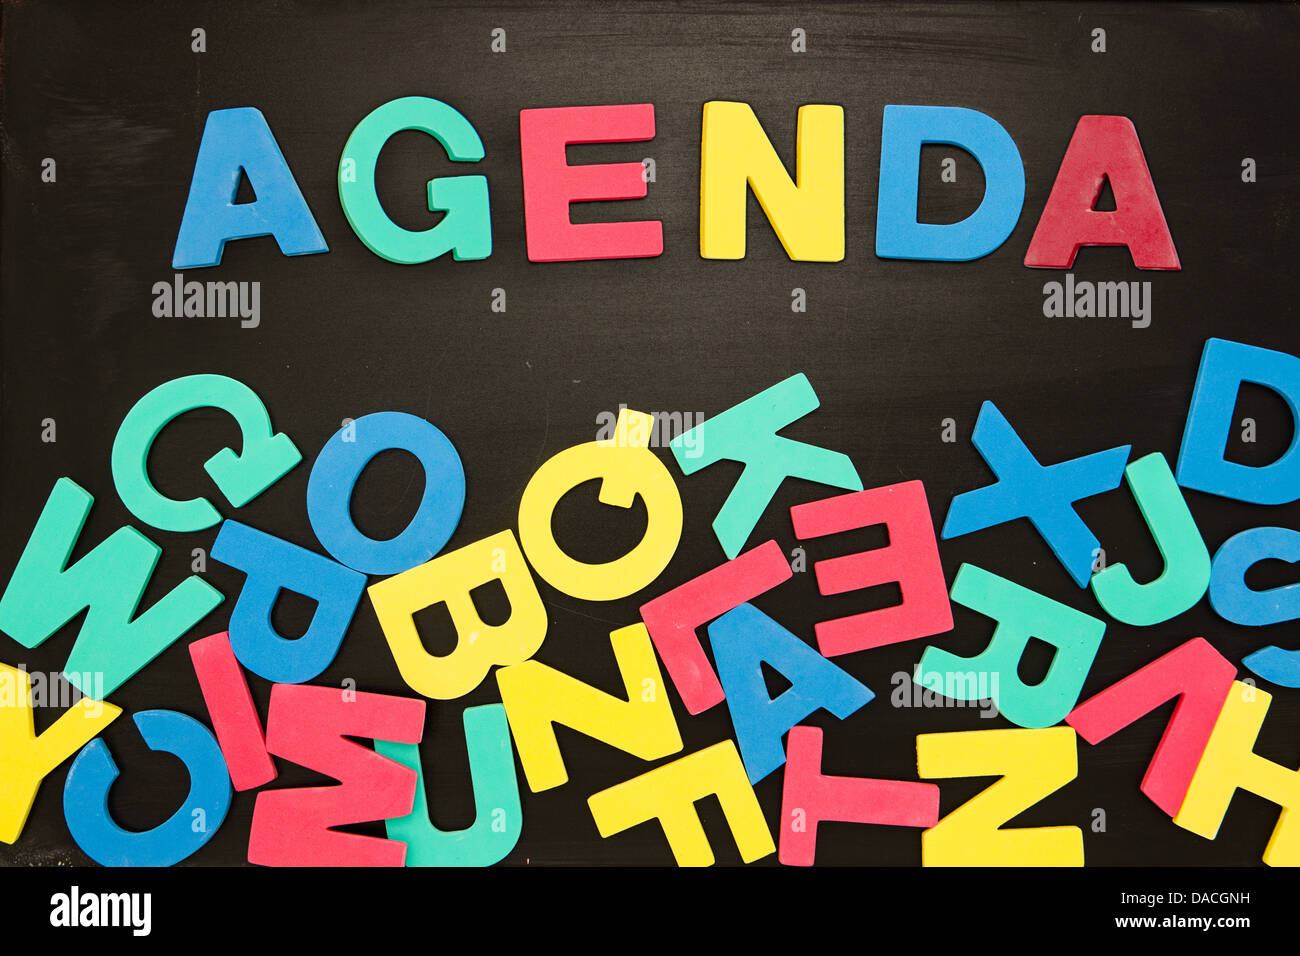 The word agenda written with colored letters Stock Photo